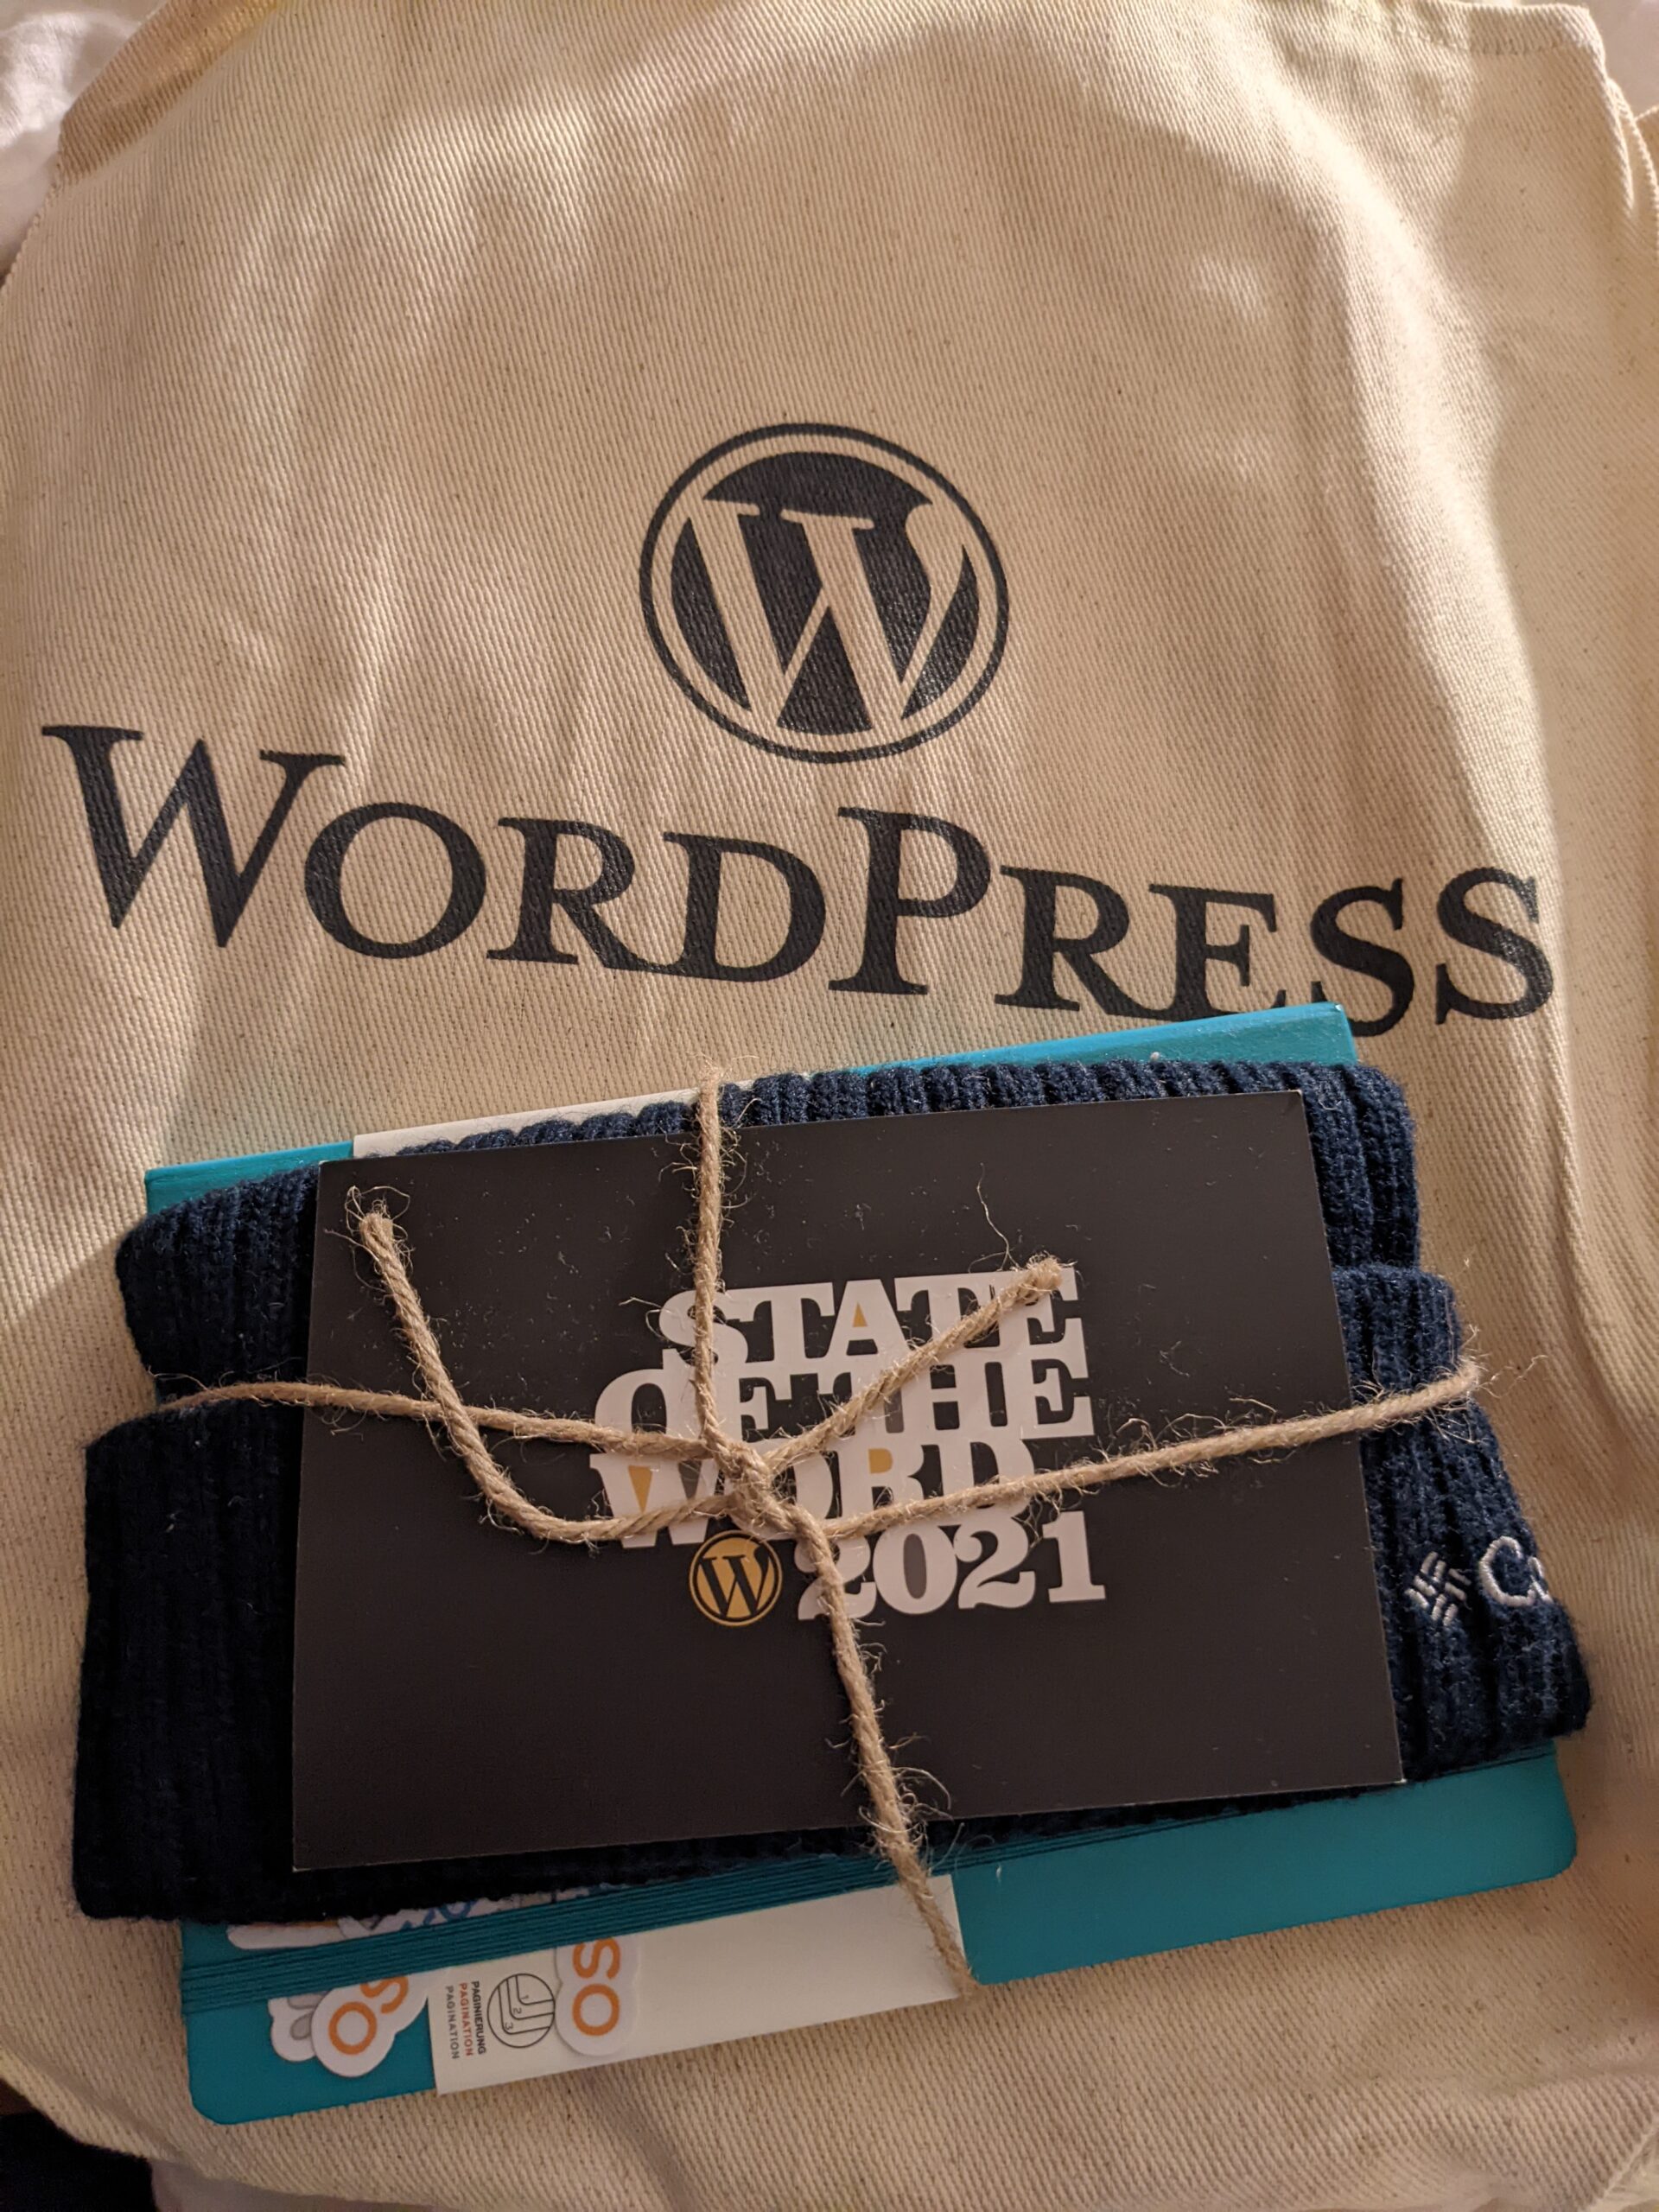 A tote bag and hat with WordPress logos on them